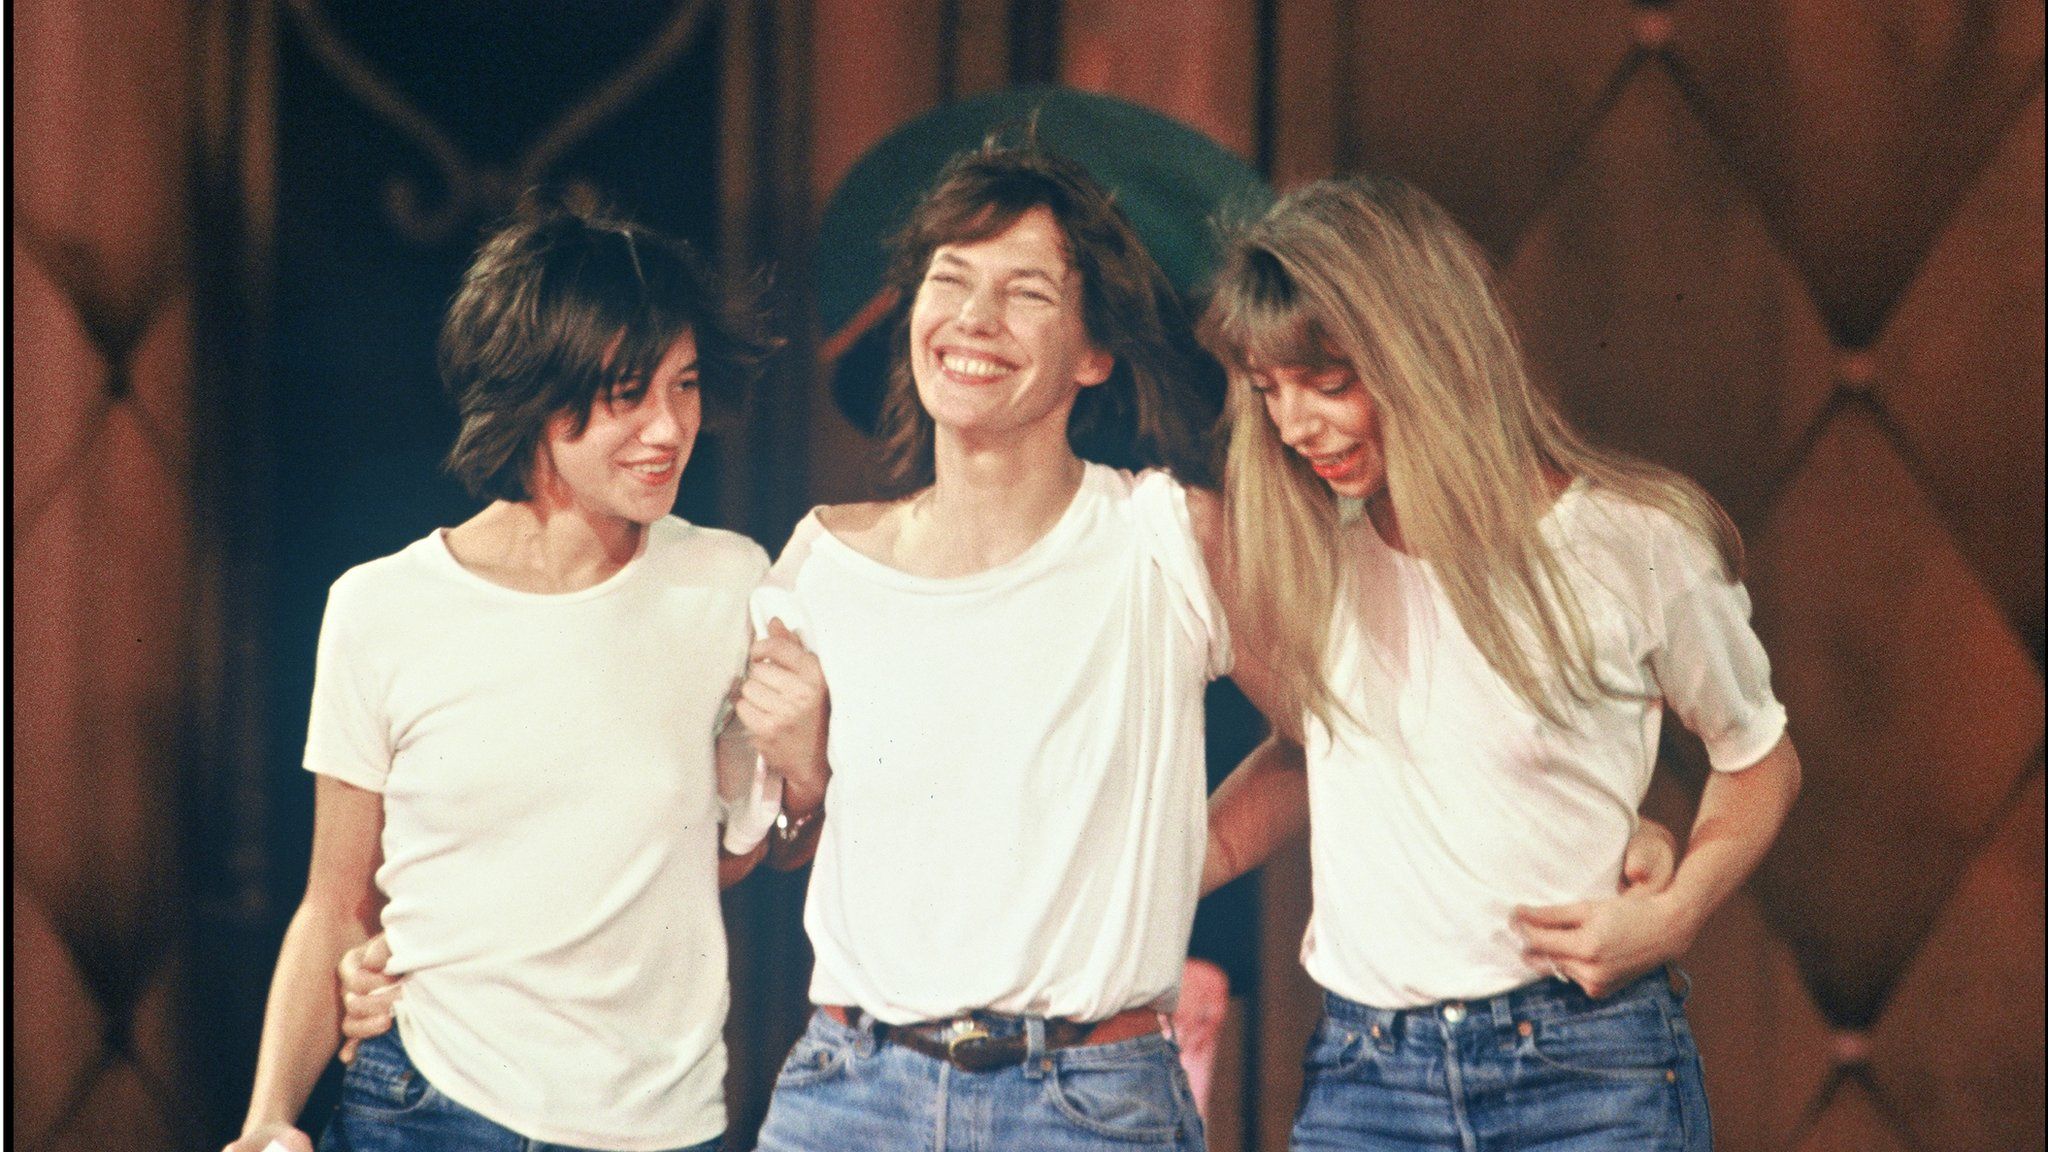 With two of her daughters, Charlotte Gainsbourg (L) and Lola Doillon (R), in 1992